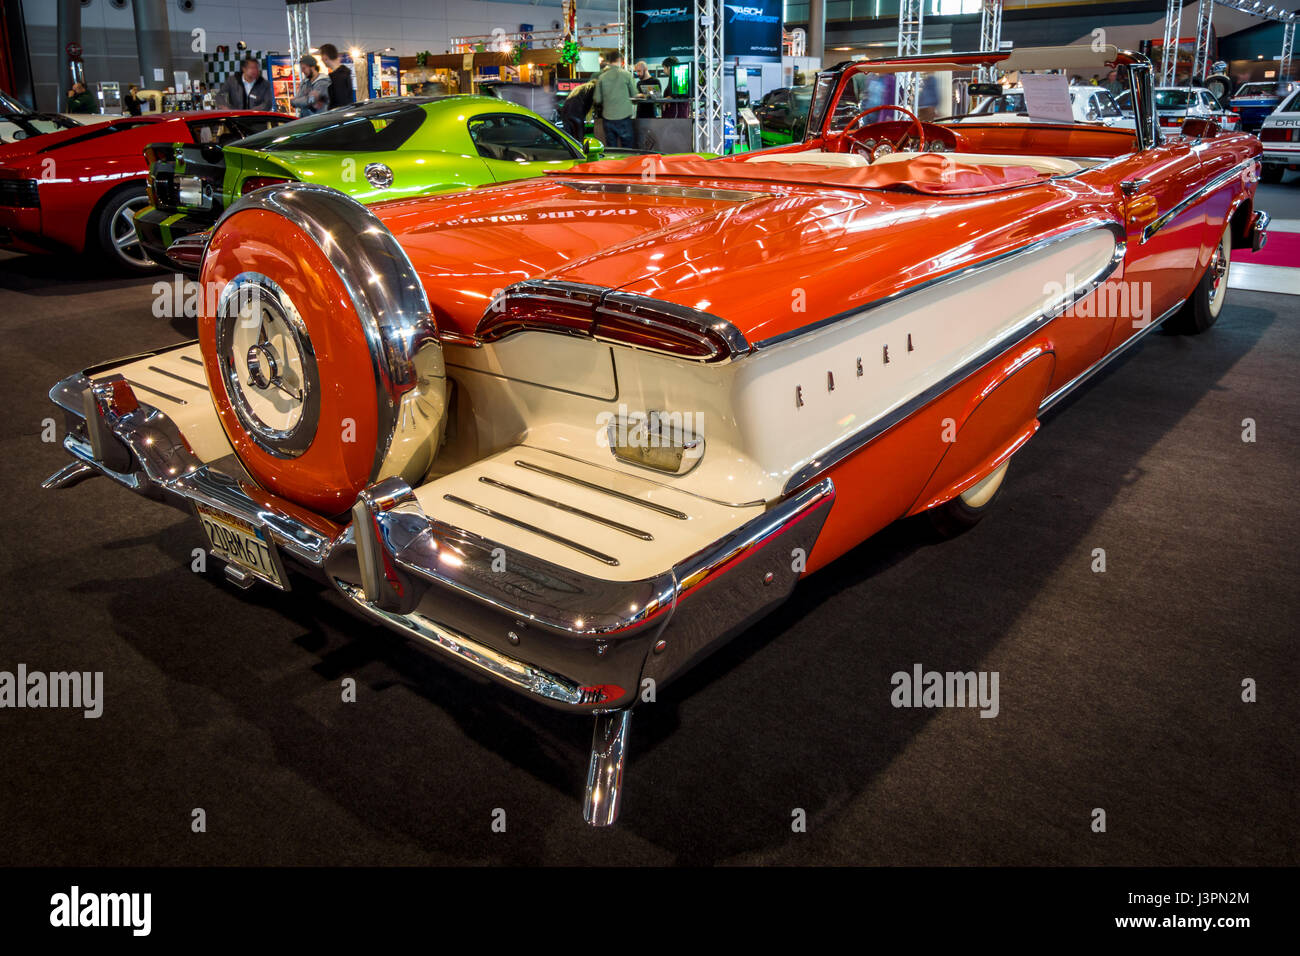 STUTTGART, GERMANY - MARCH 03, 2017: Full-size car Edsel Pacer Convertible, 1958. Rear view. Europe's greatest classic car exhibition 'RETRO CLASSICS' Stock Photo